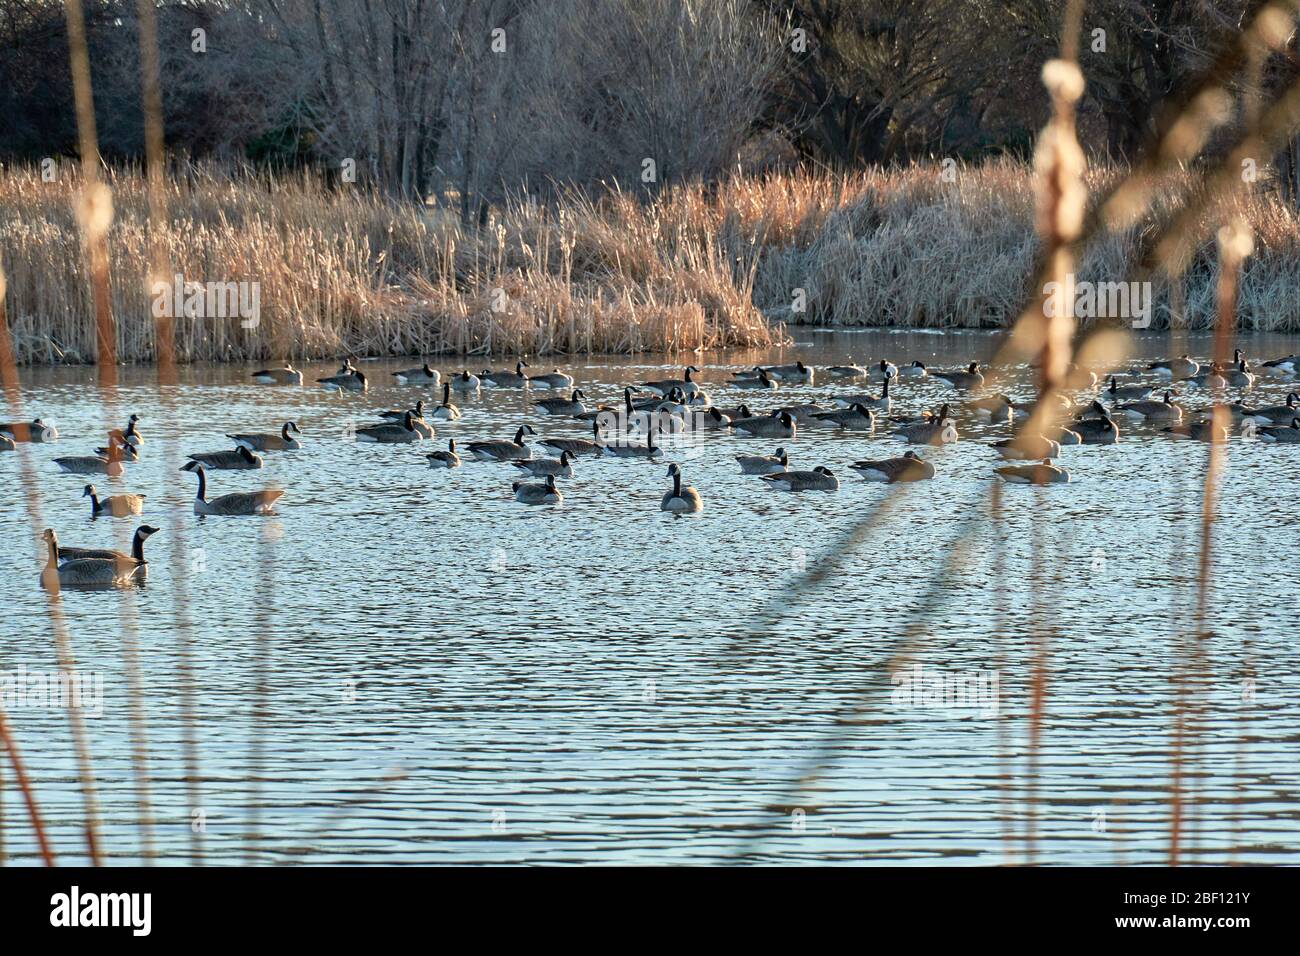 Canadian Geese swimming in a pond with Cattails as a background. Winter in Texas Stock Photo